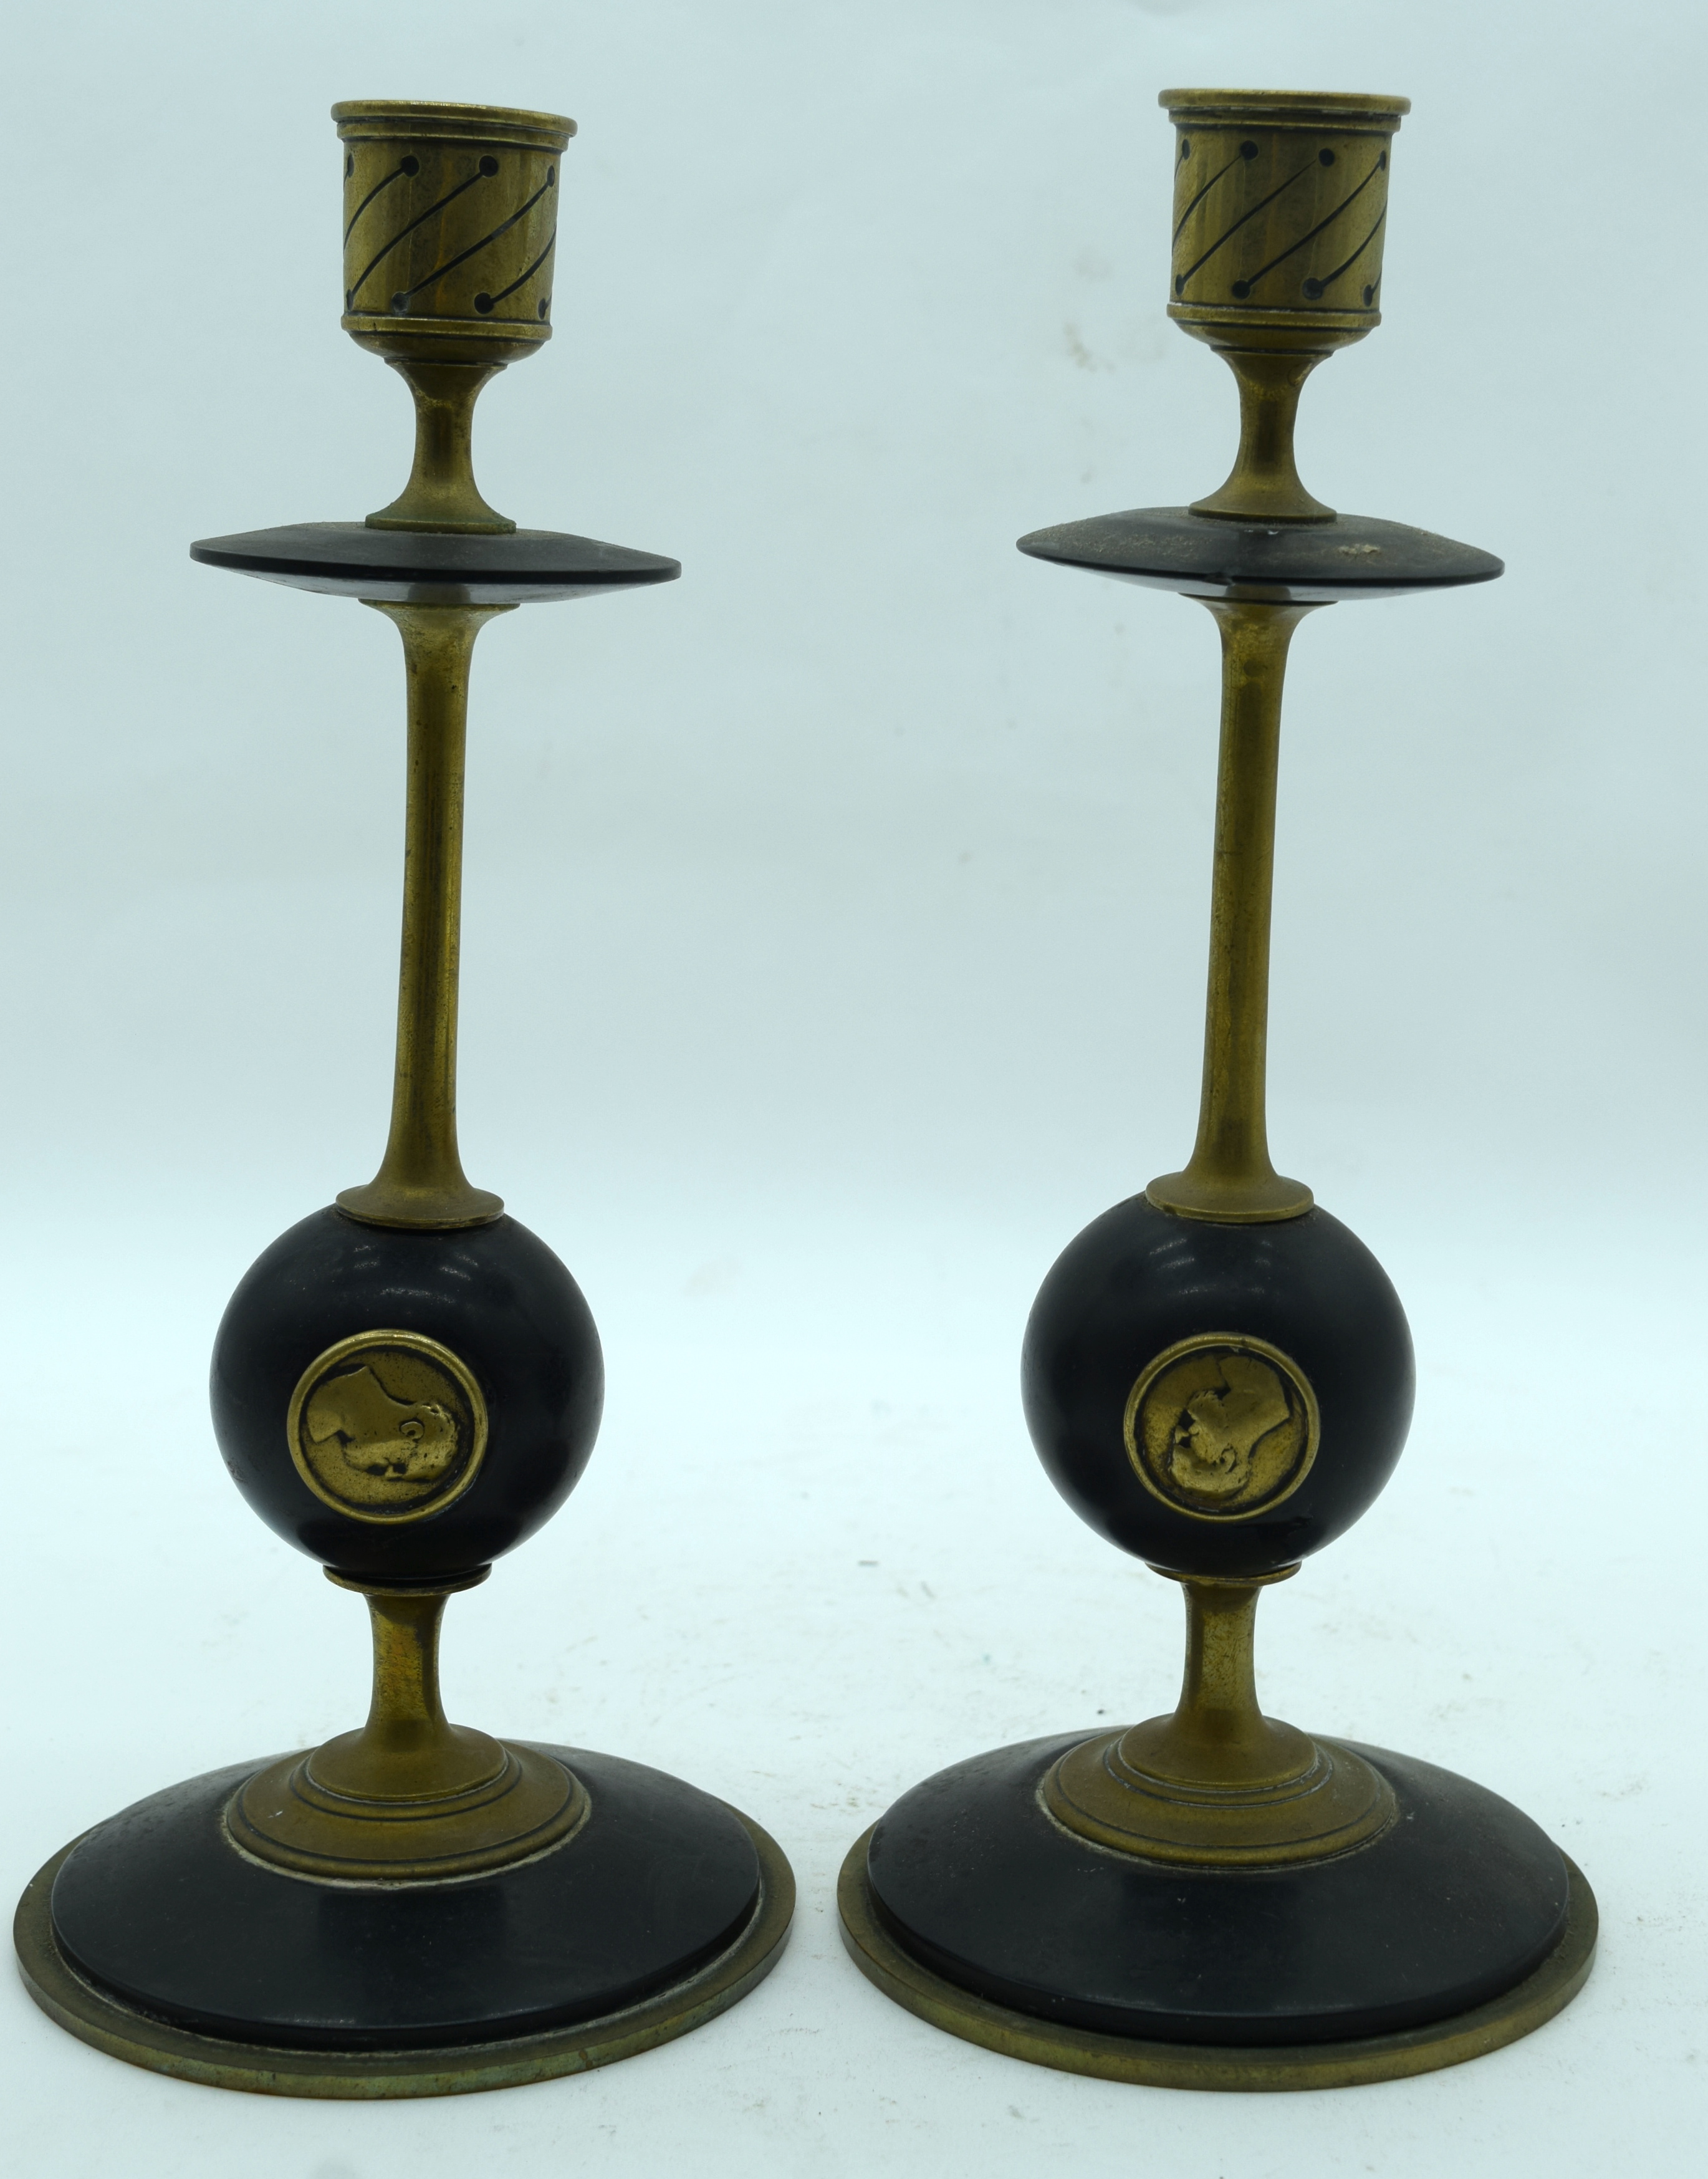 A PAIR OF 19TH CENTURY FRENCH BRASS CANDLESTICKS decorated with portraits. 27 cm high.